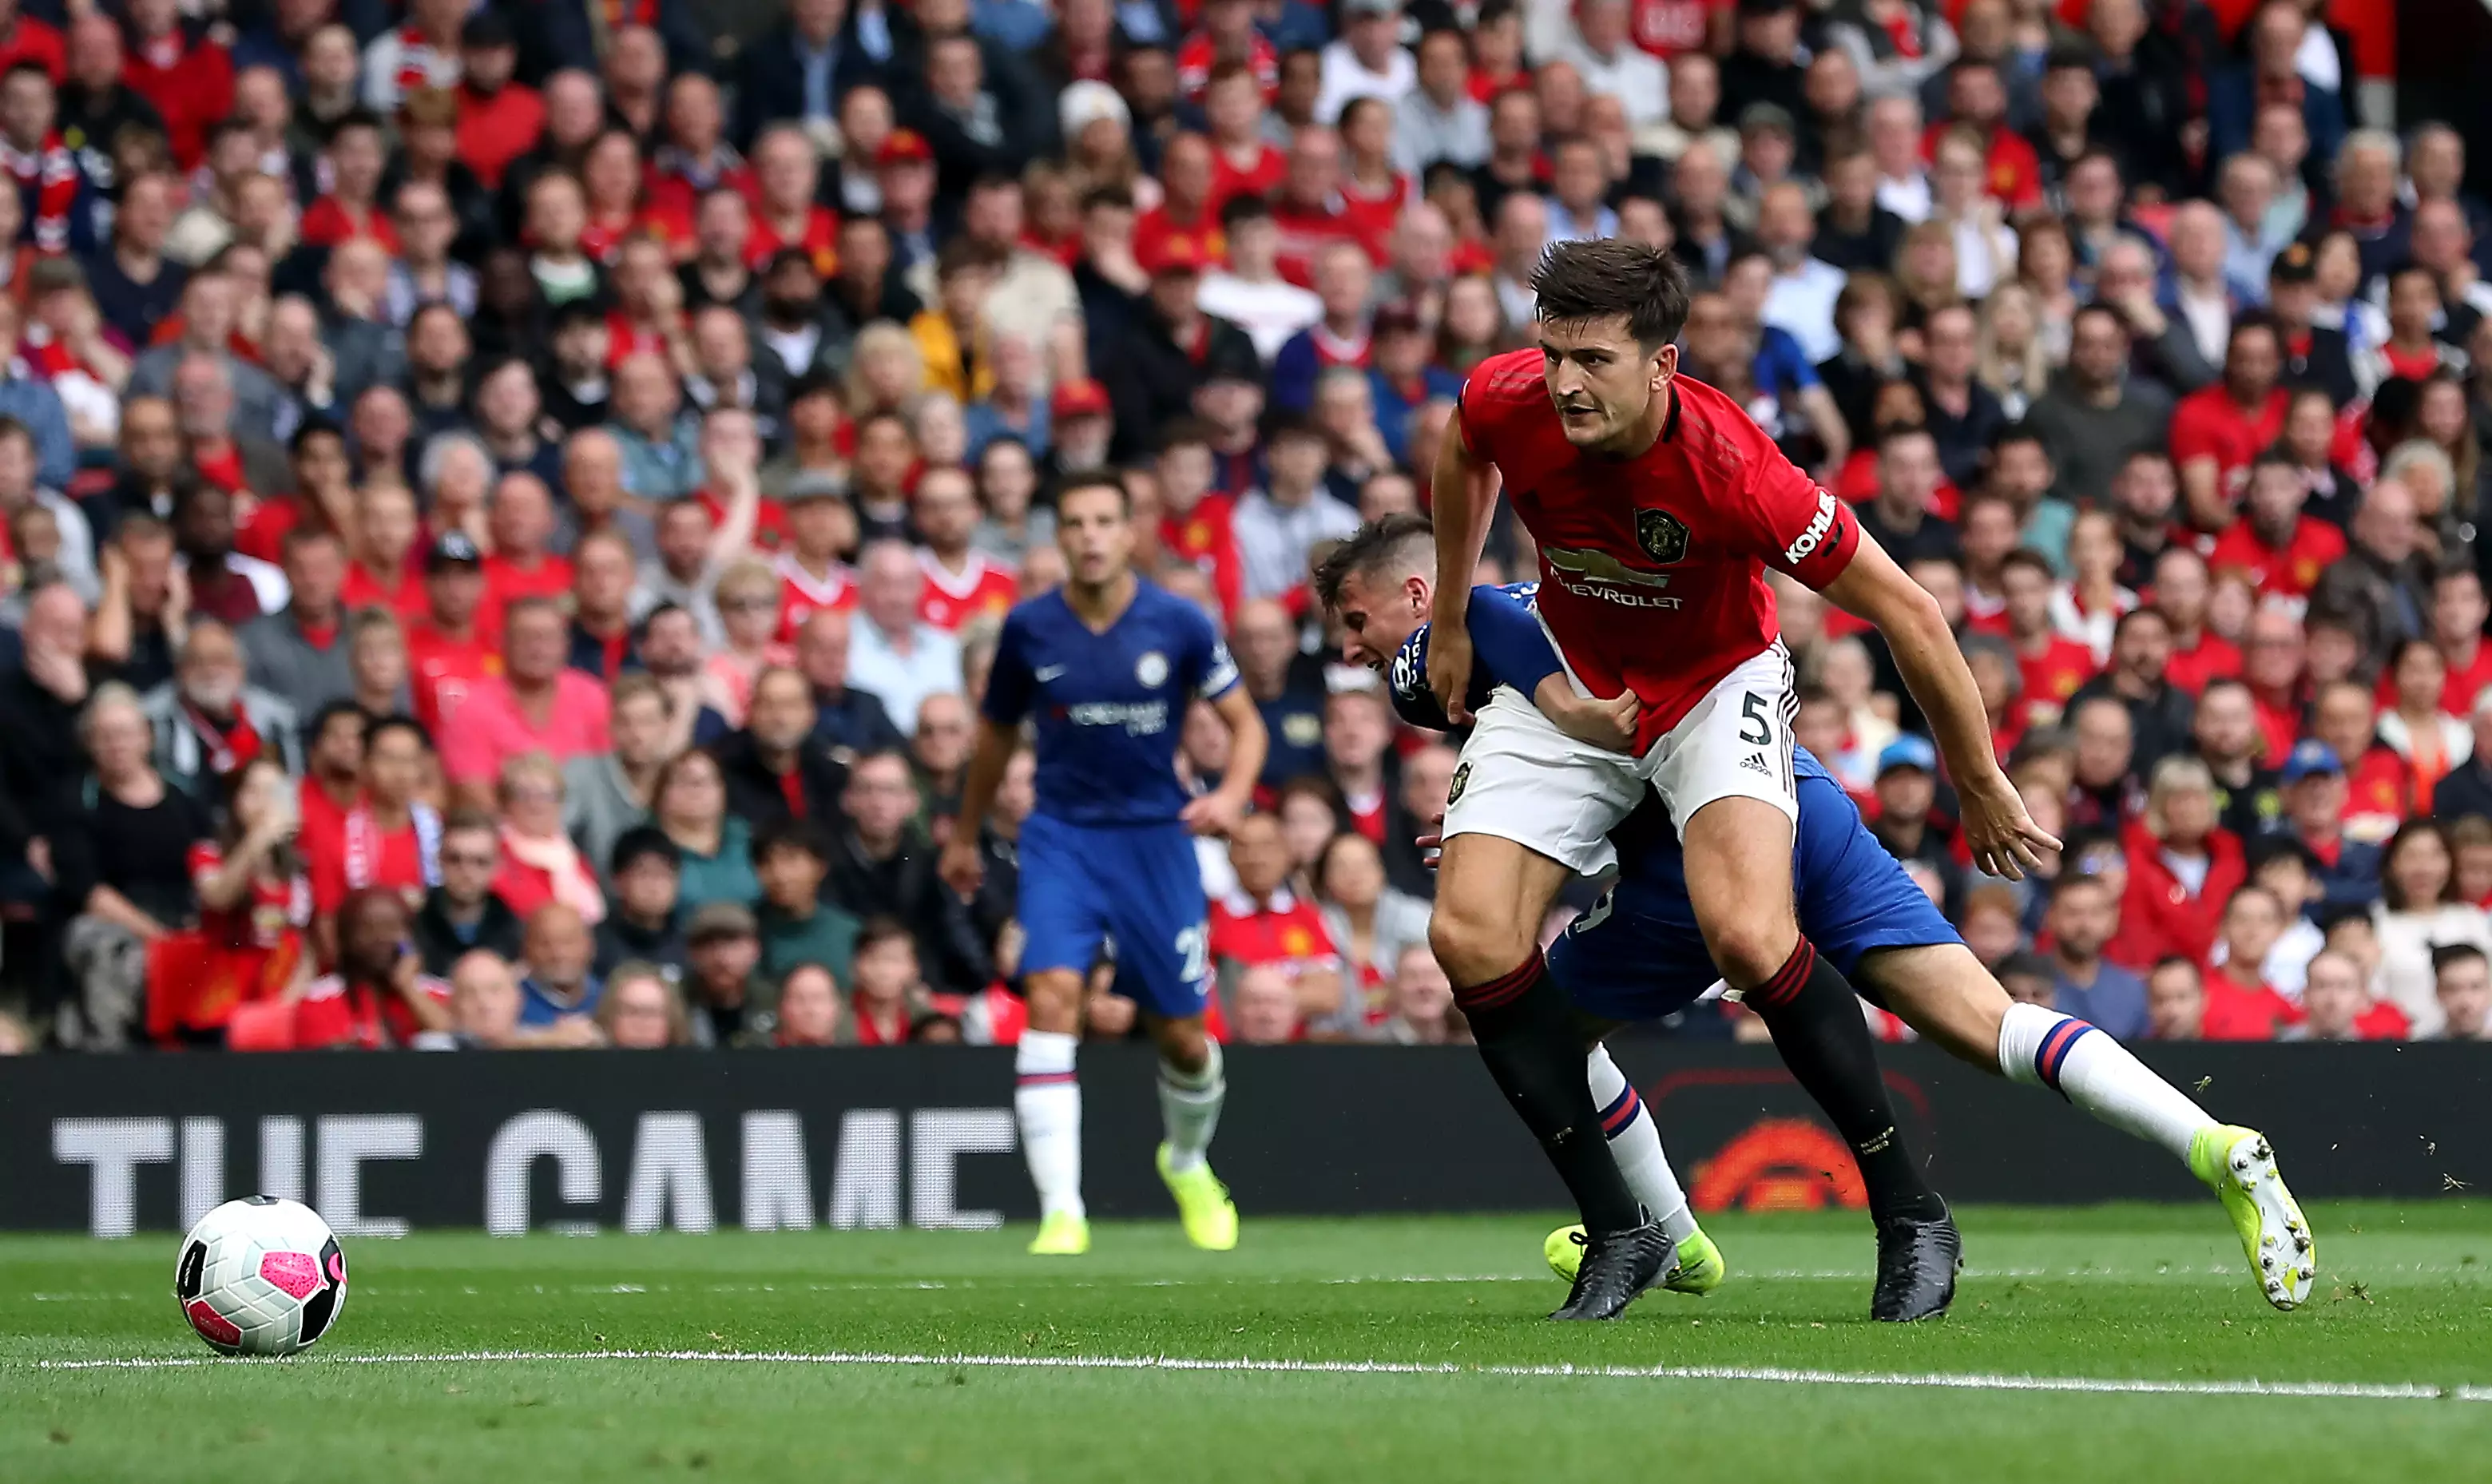 Harry Maguire helped Manchester United keep a clean sheet at Old Trafford - something they only managed twice last season